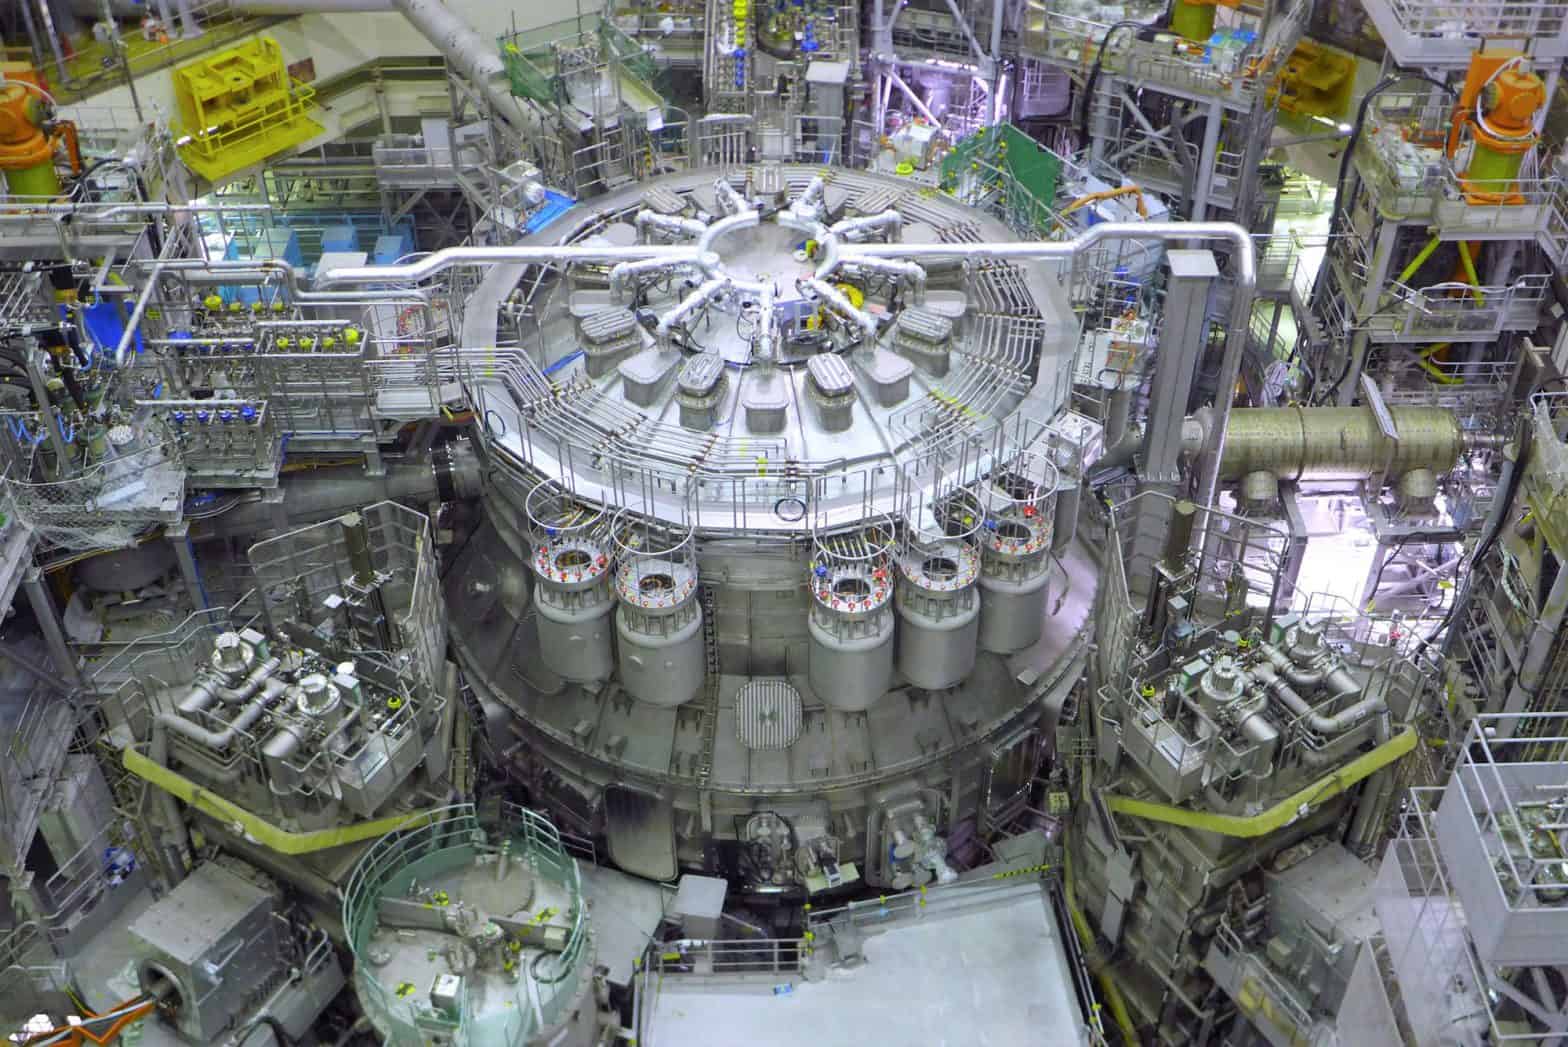 Japan and the European Union herald a new era with the launch of the world’s largest experimental fusion reactor at Naka